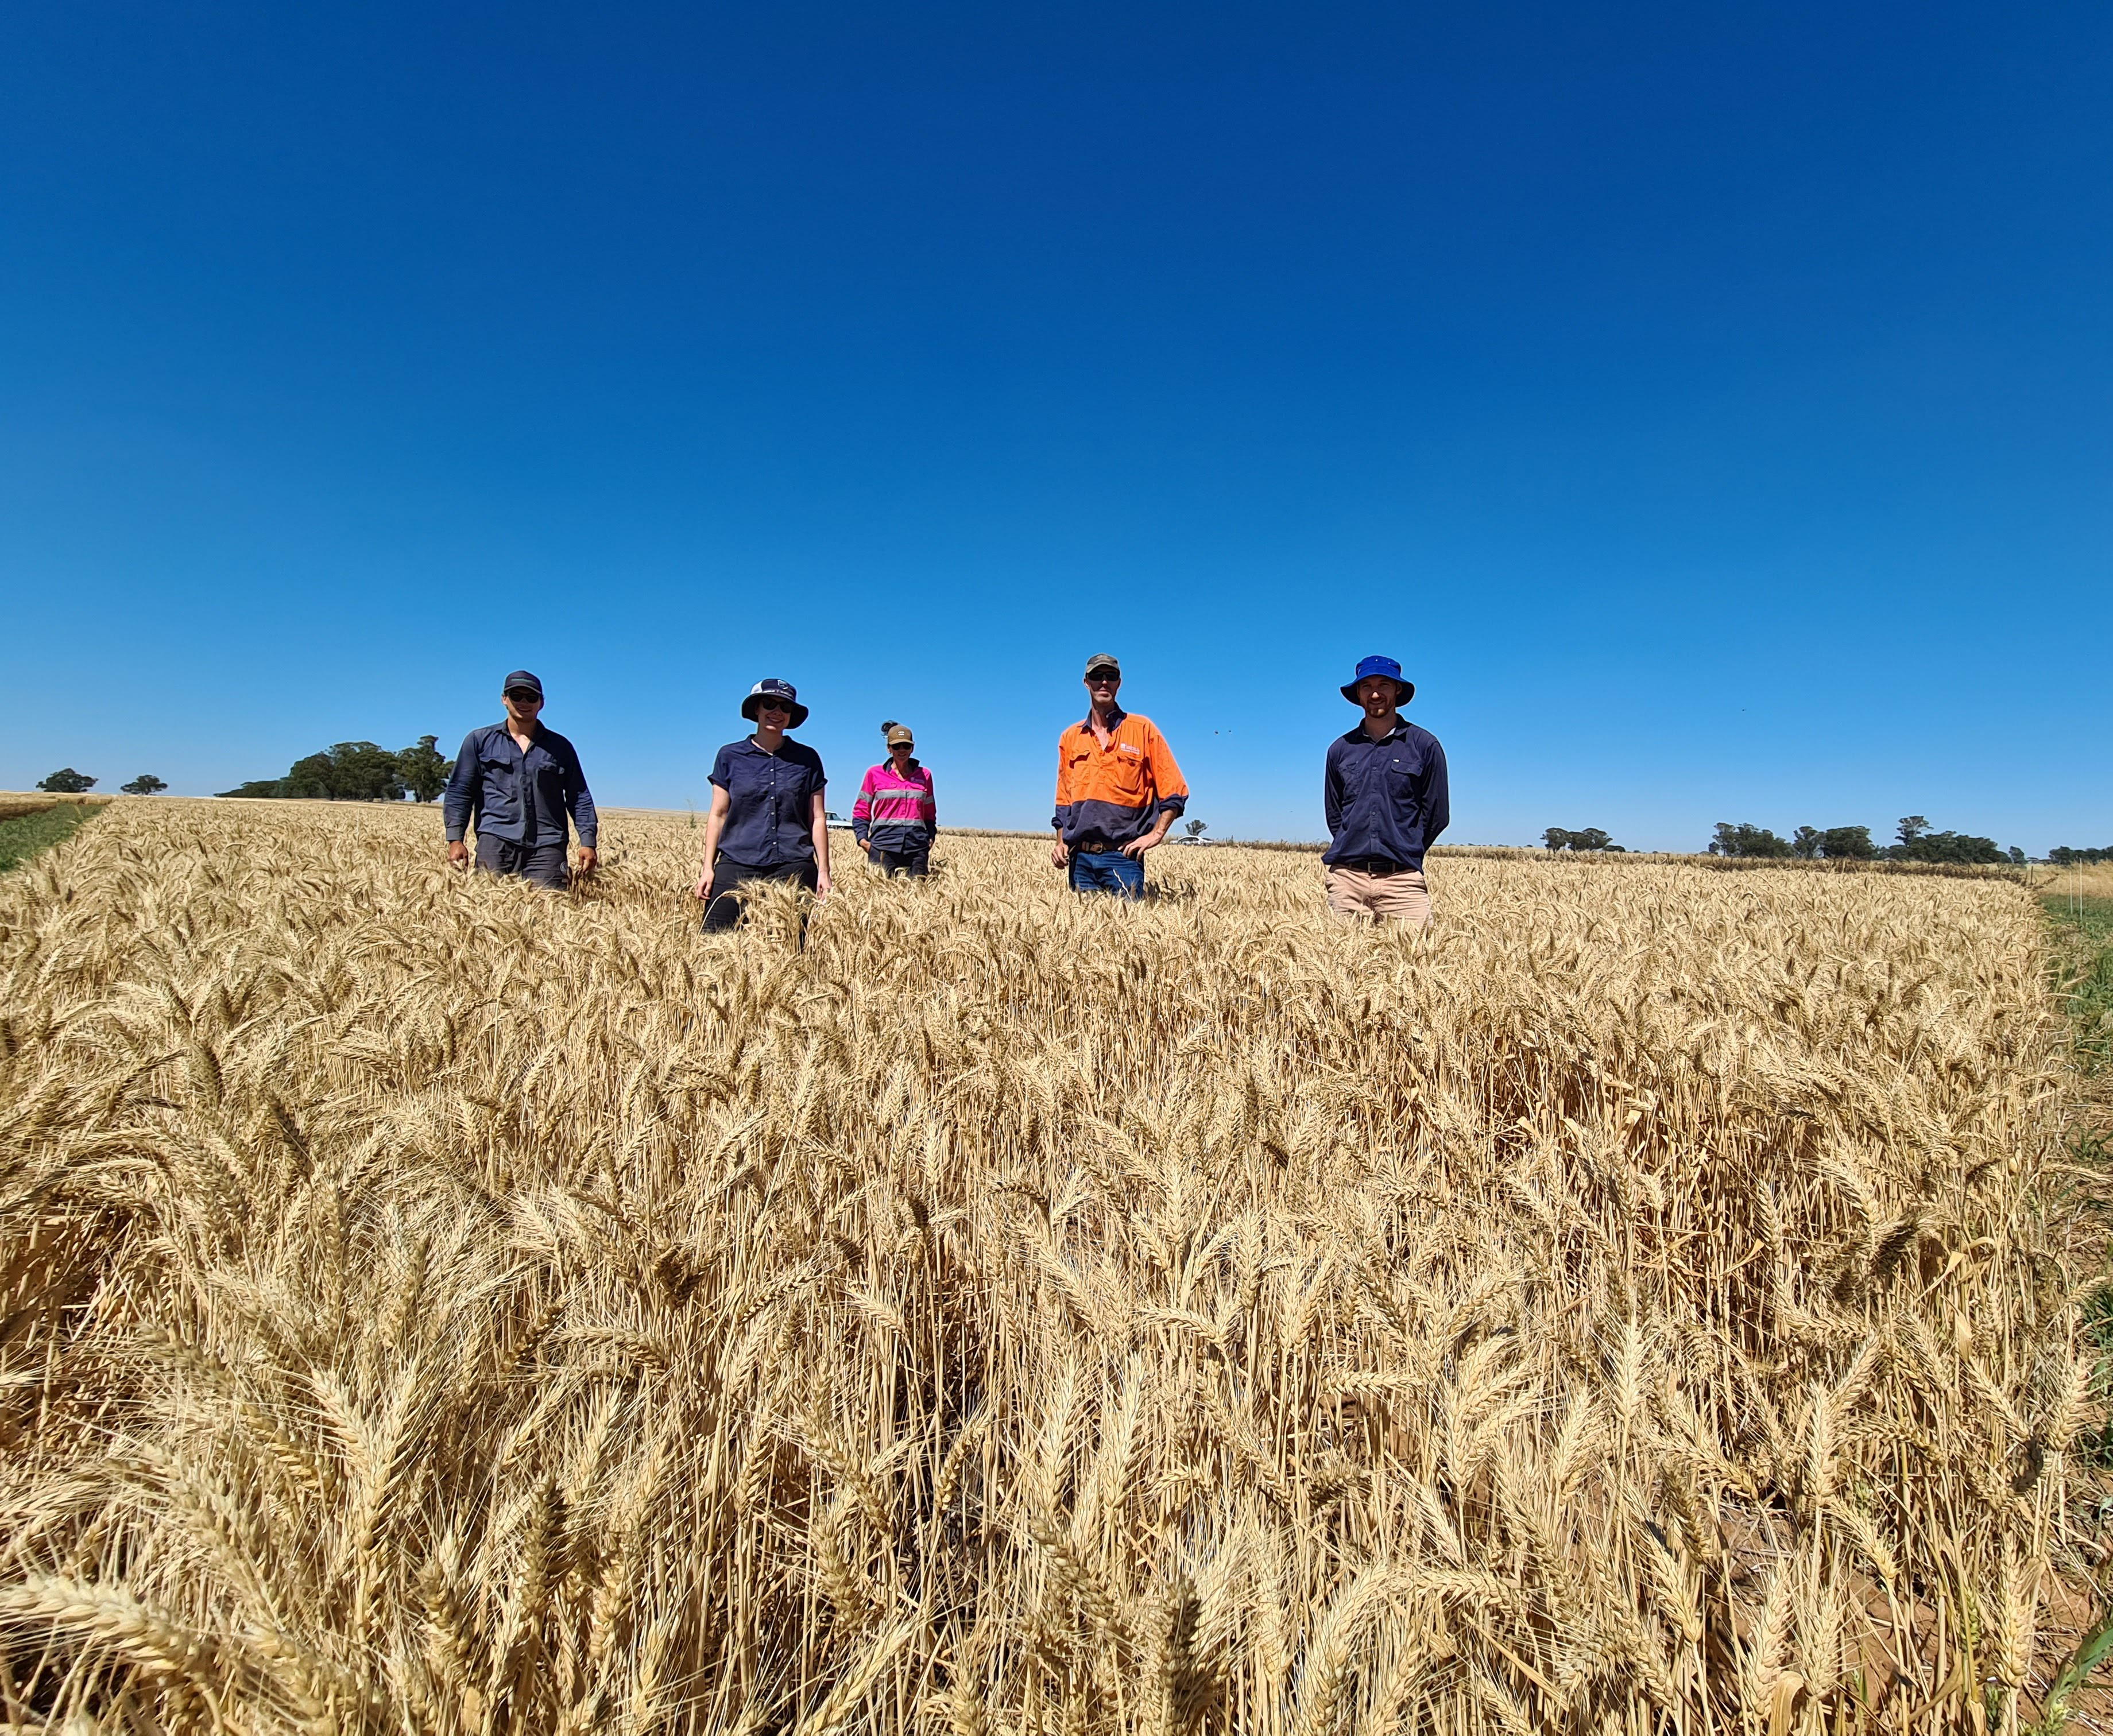 People standing in a field of wheat